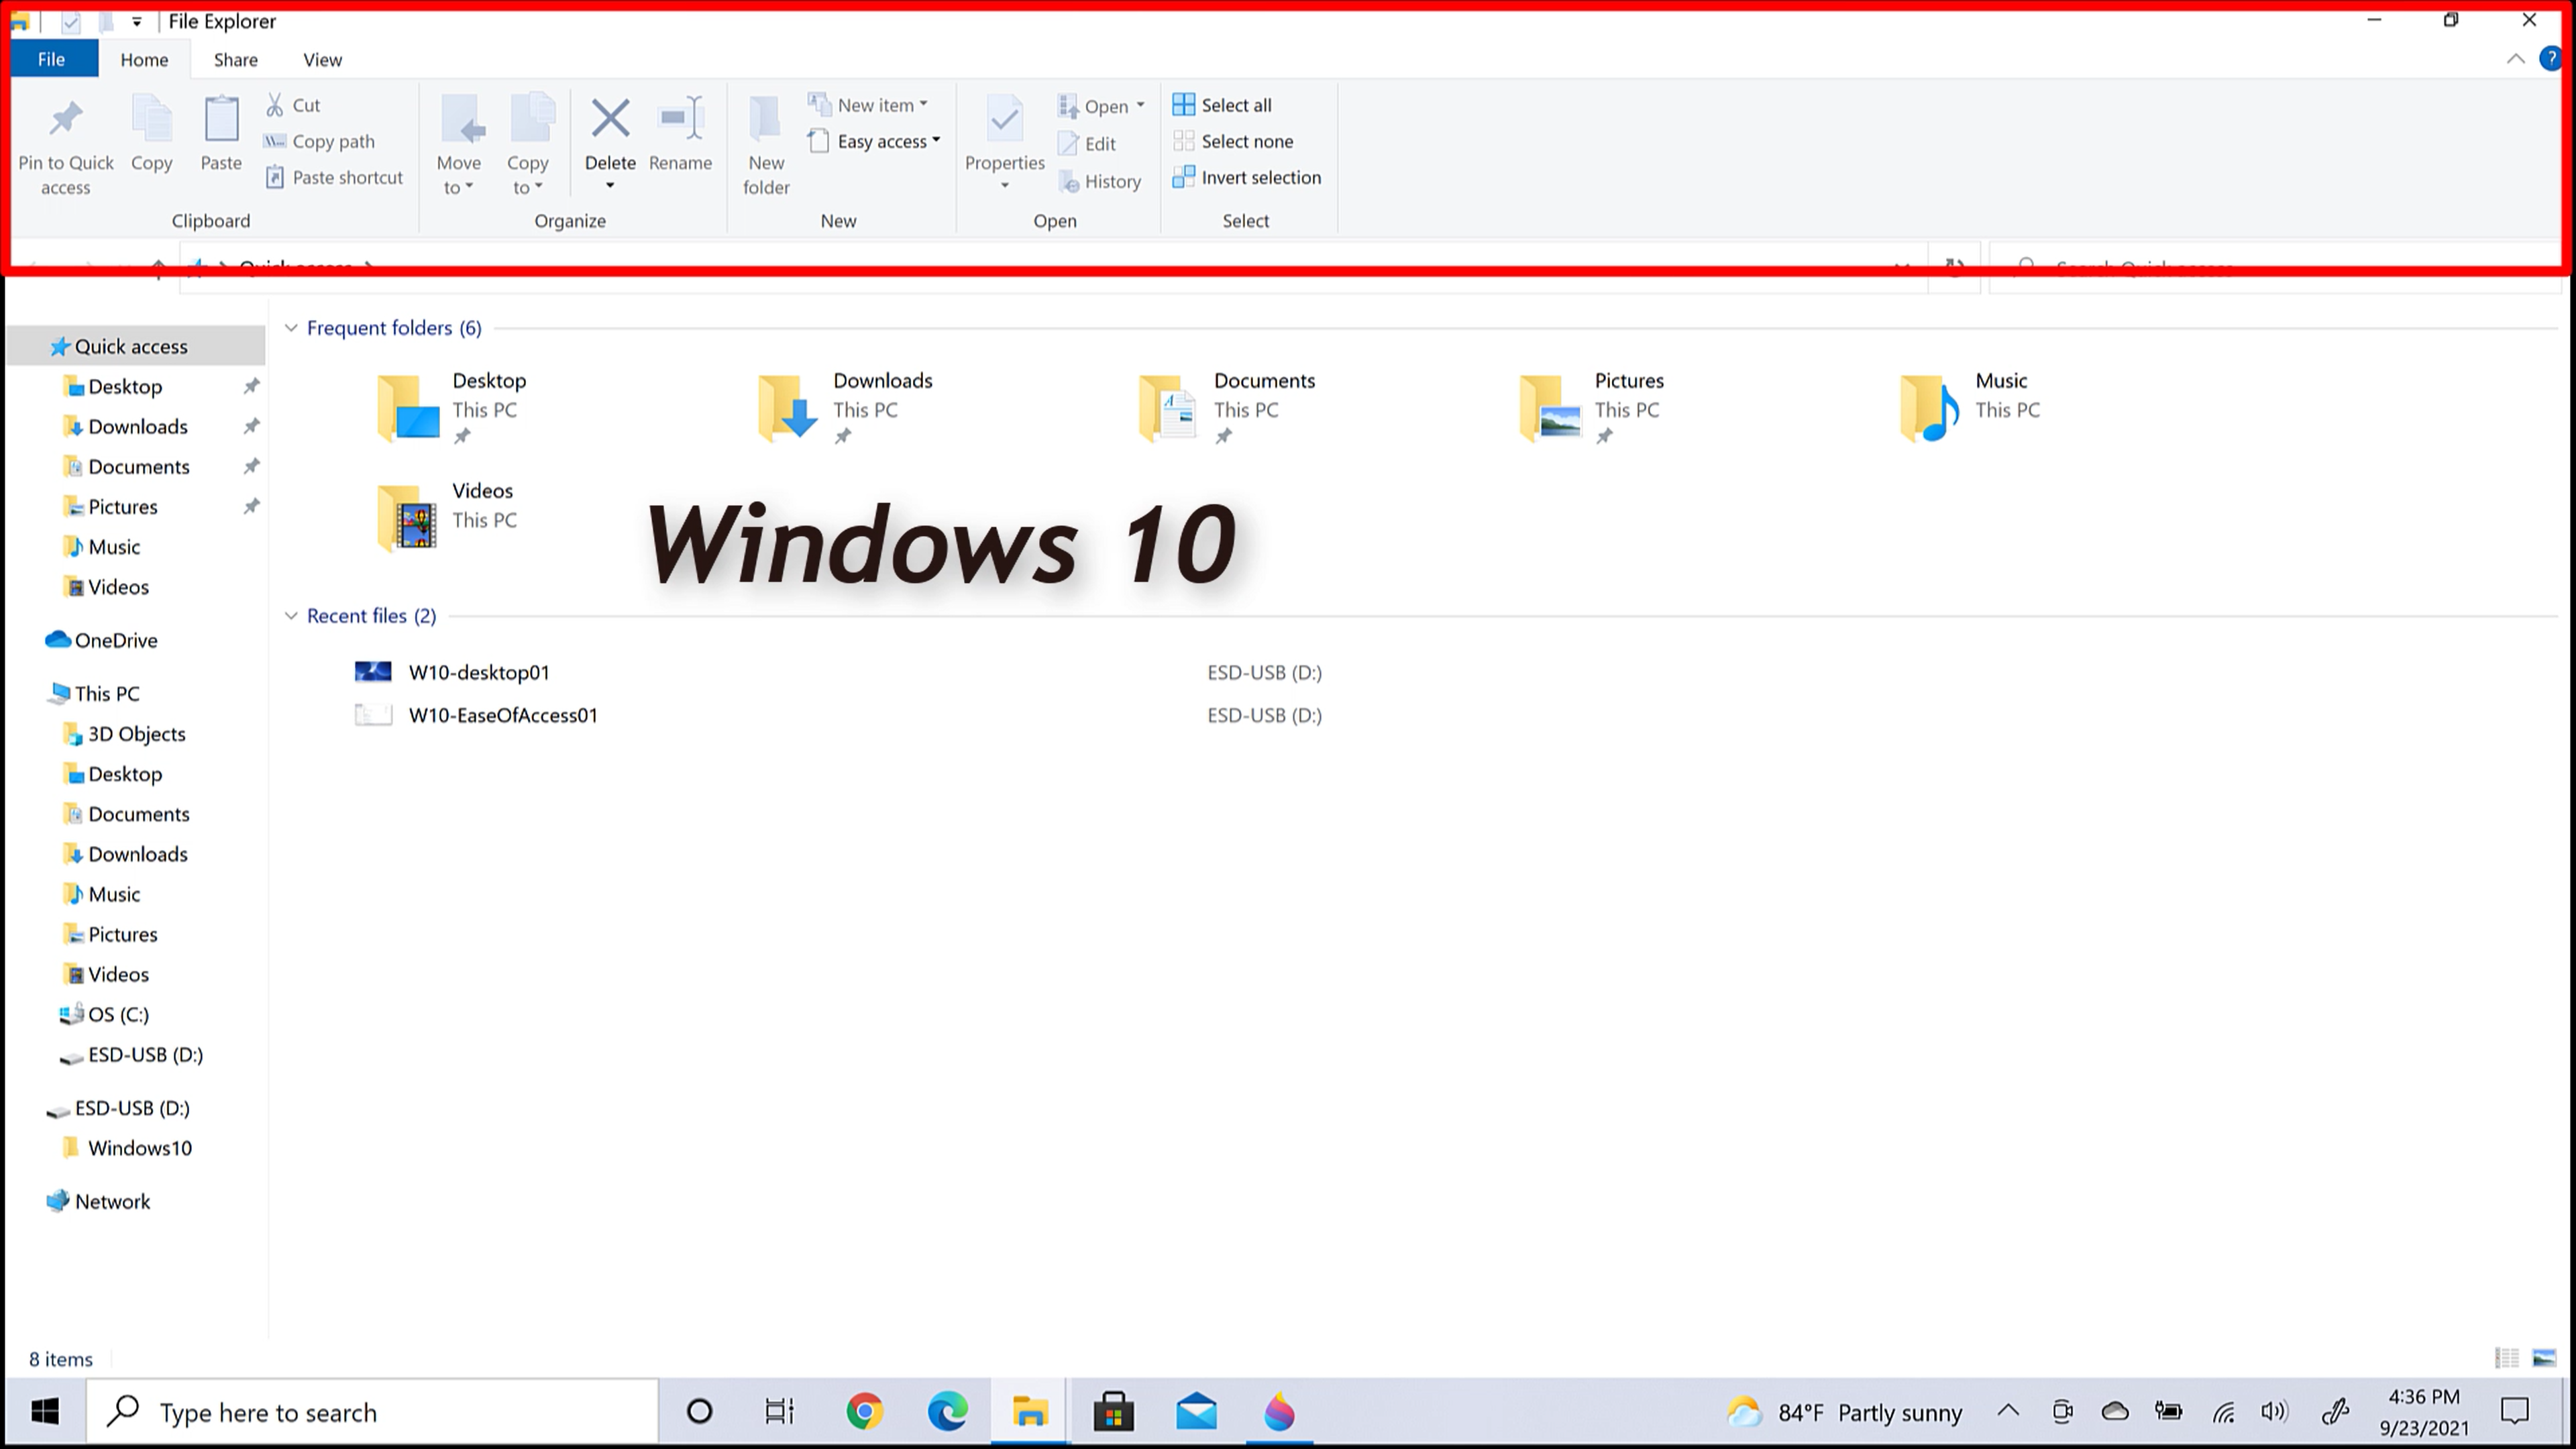 Windows 10 File Explorer showing the ribbon menu at the top of the screen.